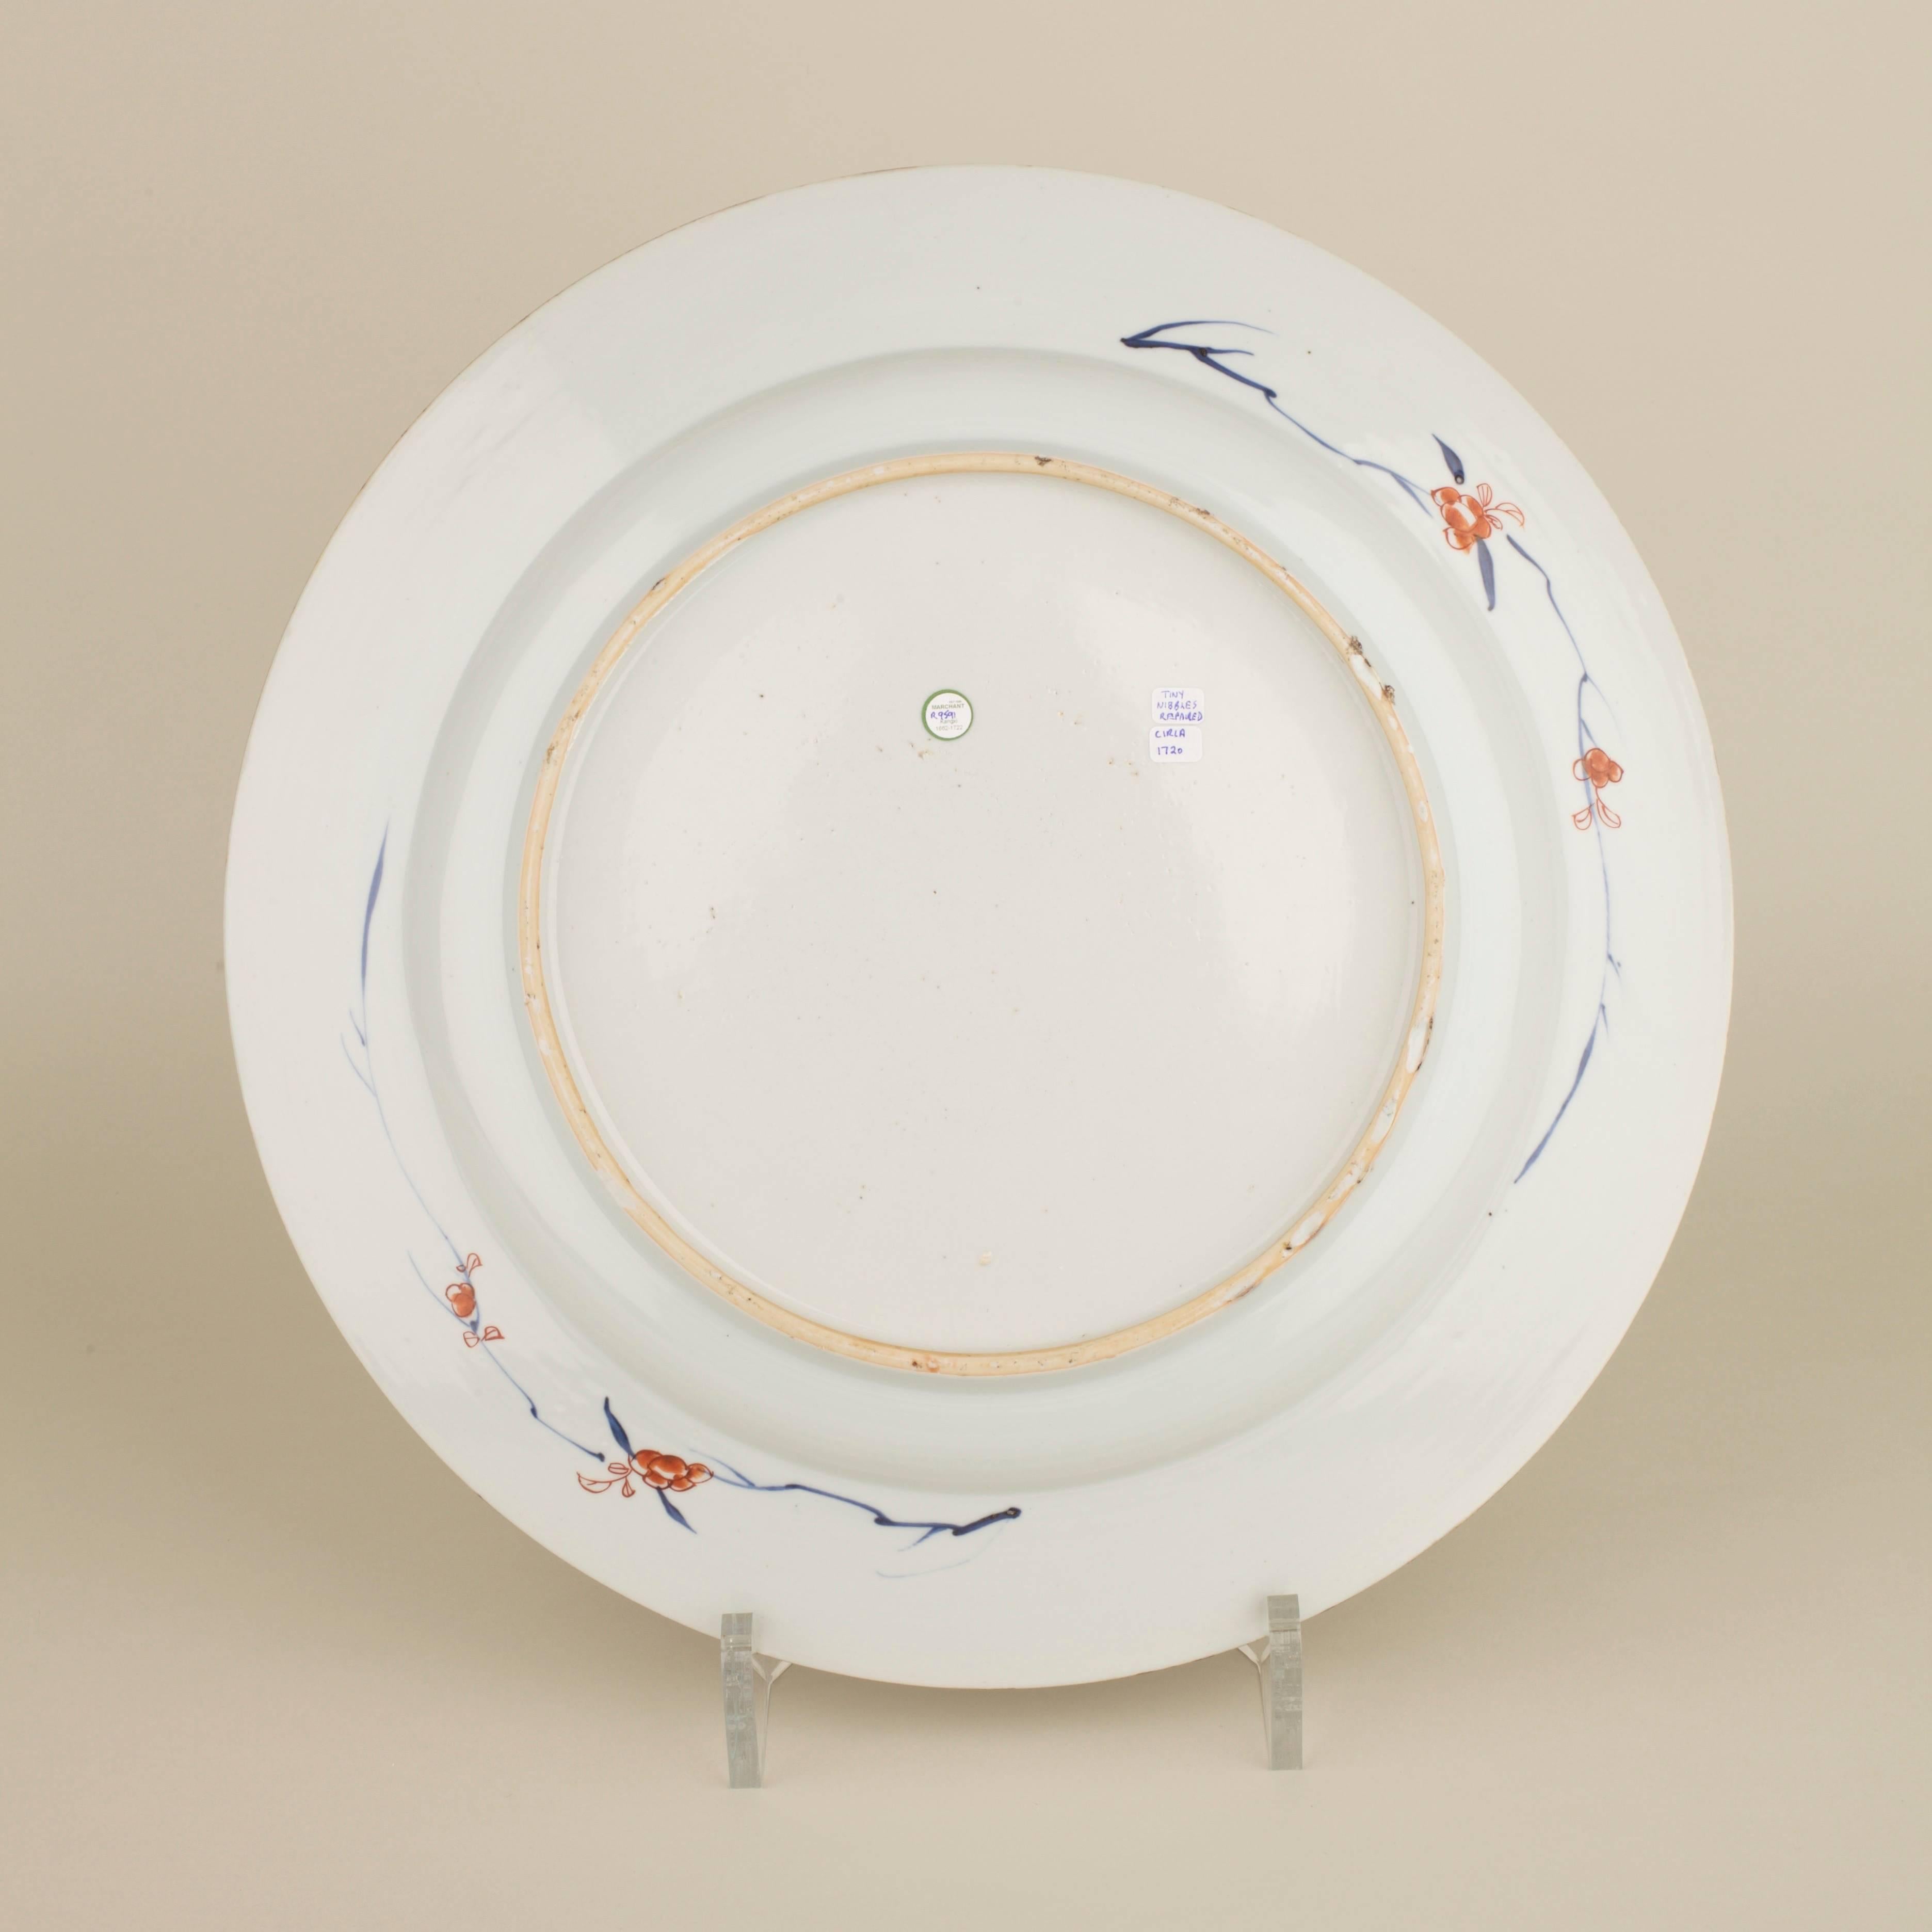 Chinese porcelain underglaze blue and white large plate with flat everted rim painted in the centre with a lady and two boys in a fenced garden scene, the lady picking flowers from a tree whilst the boys play beside a fence, all surrounded by